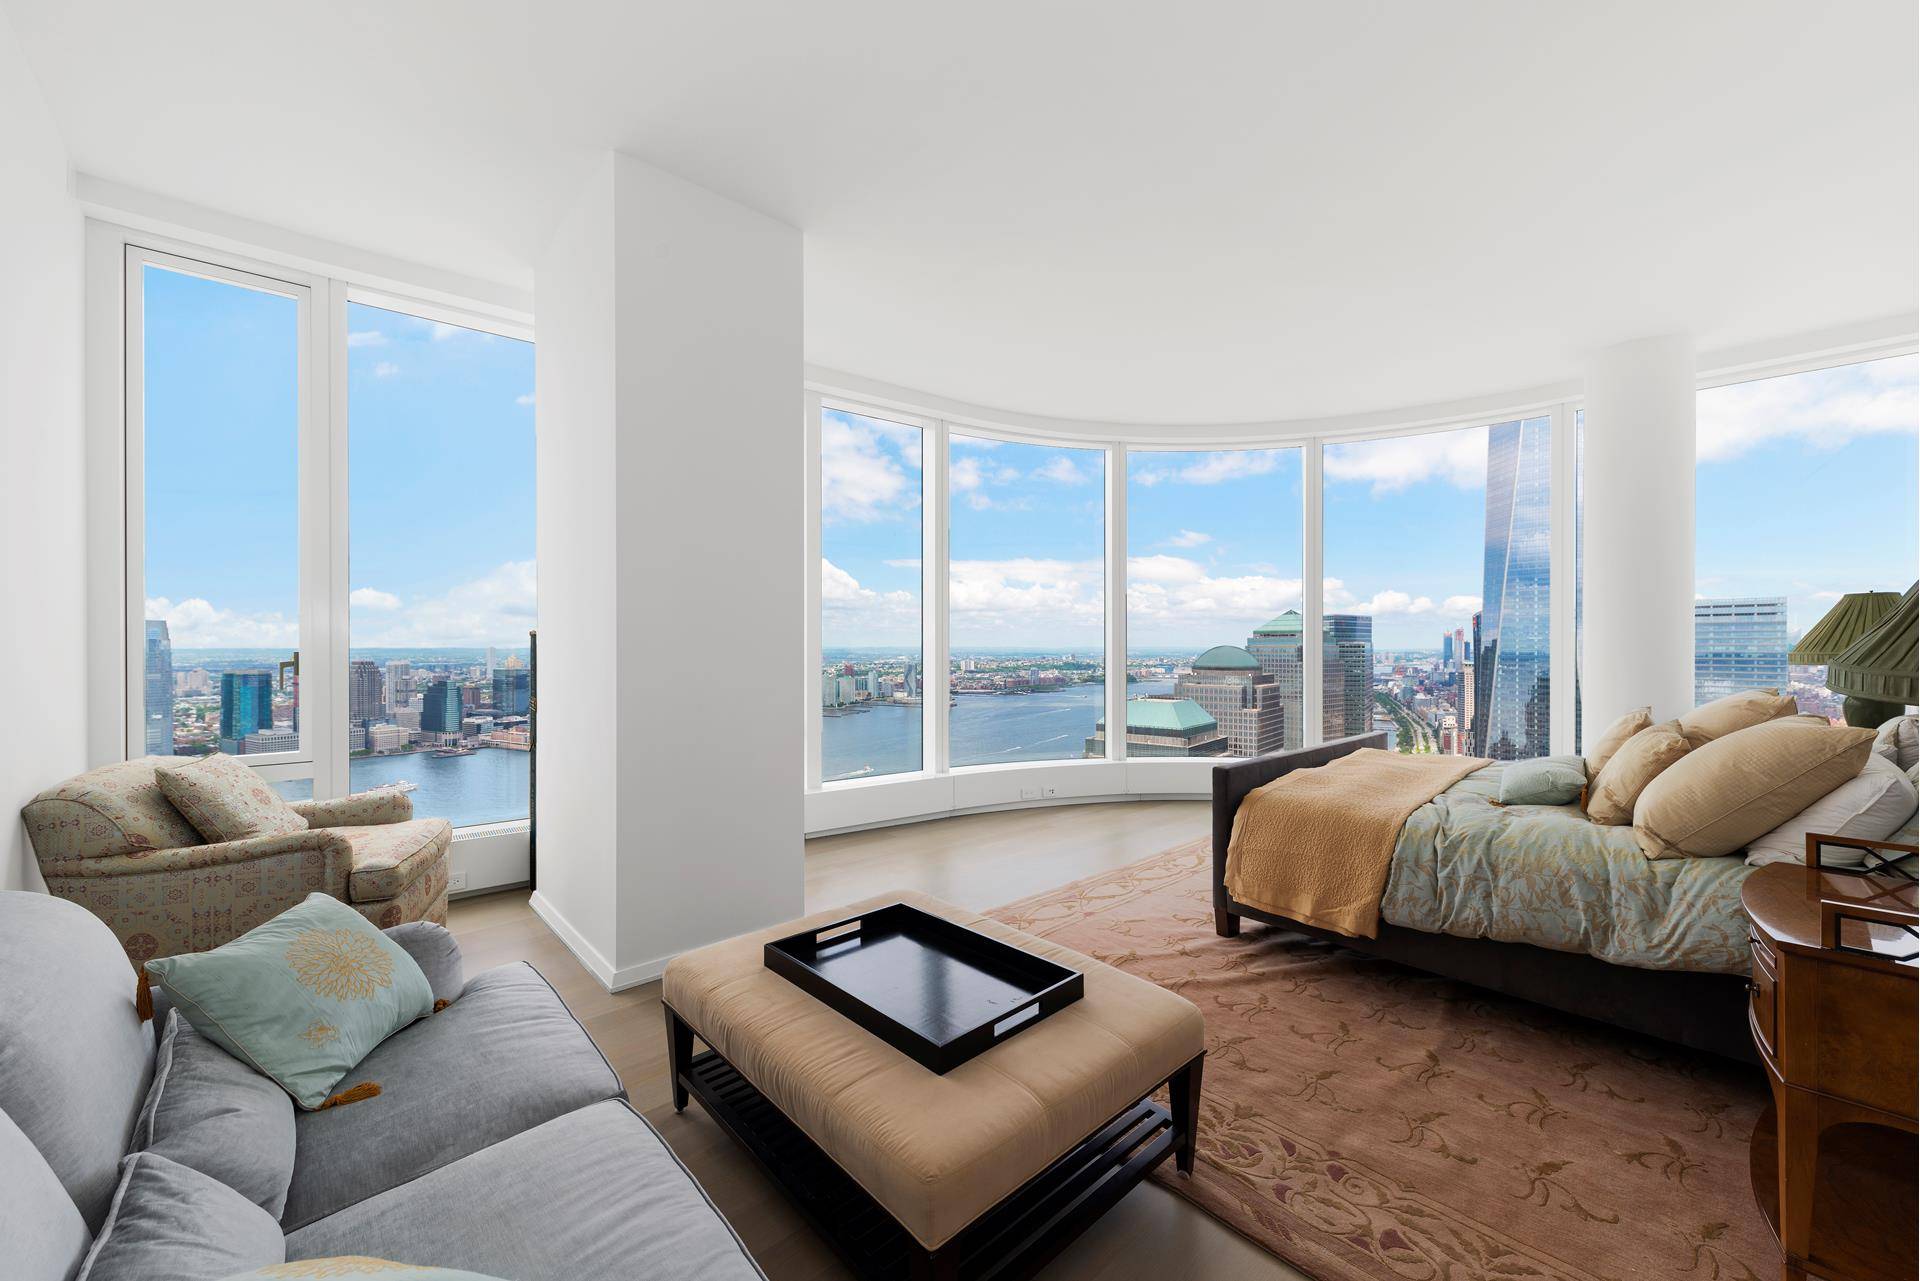 Be the first owner to reside in this spacious four bedroom, four bathroom penthouse.